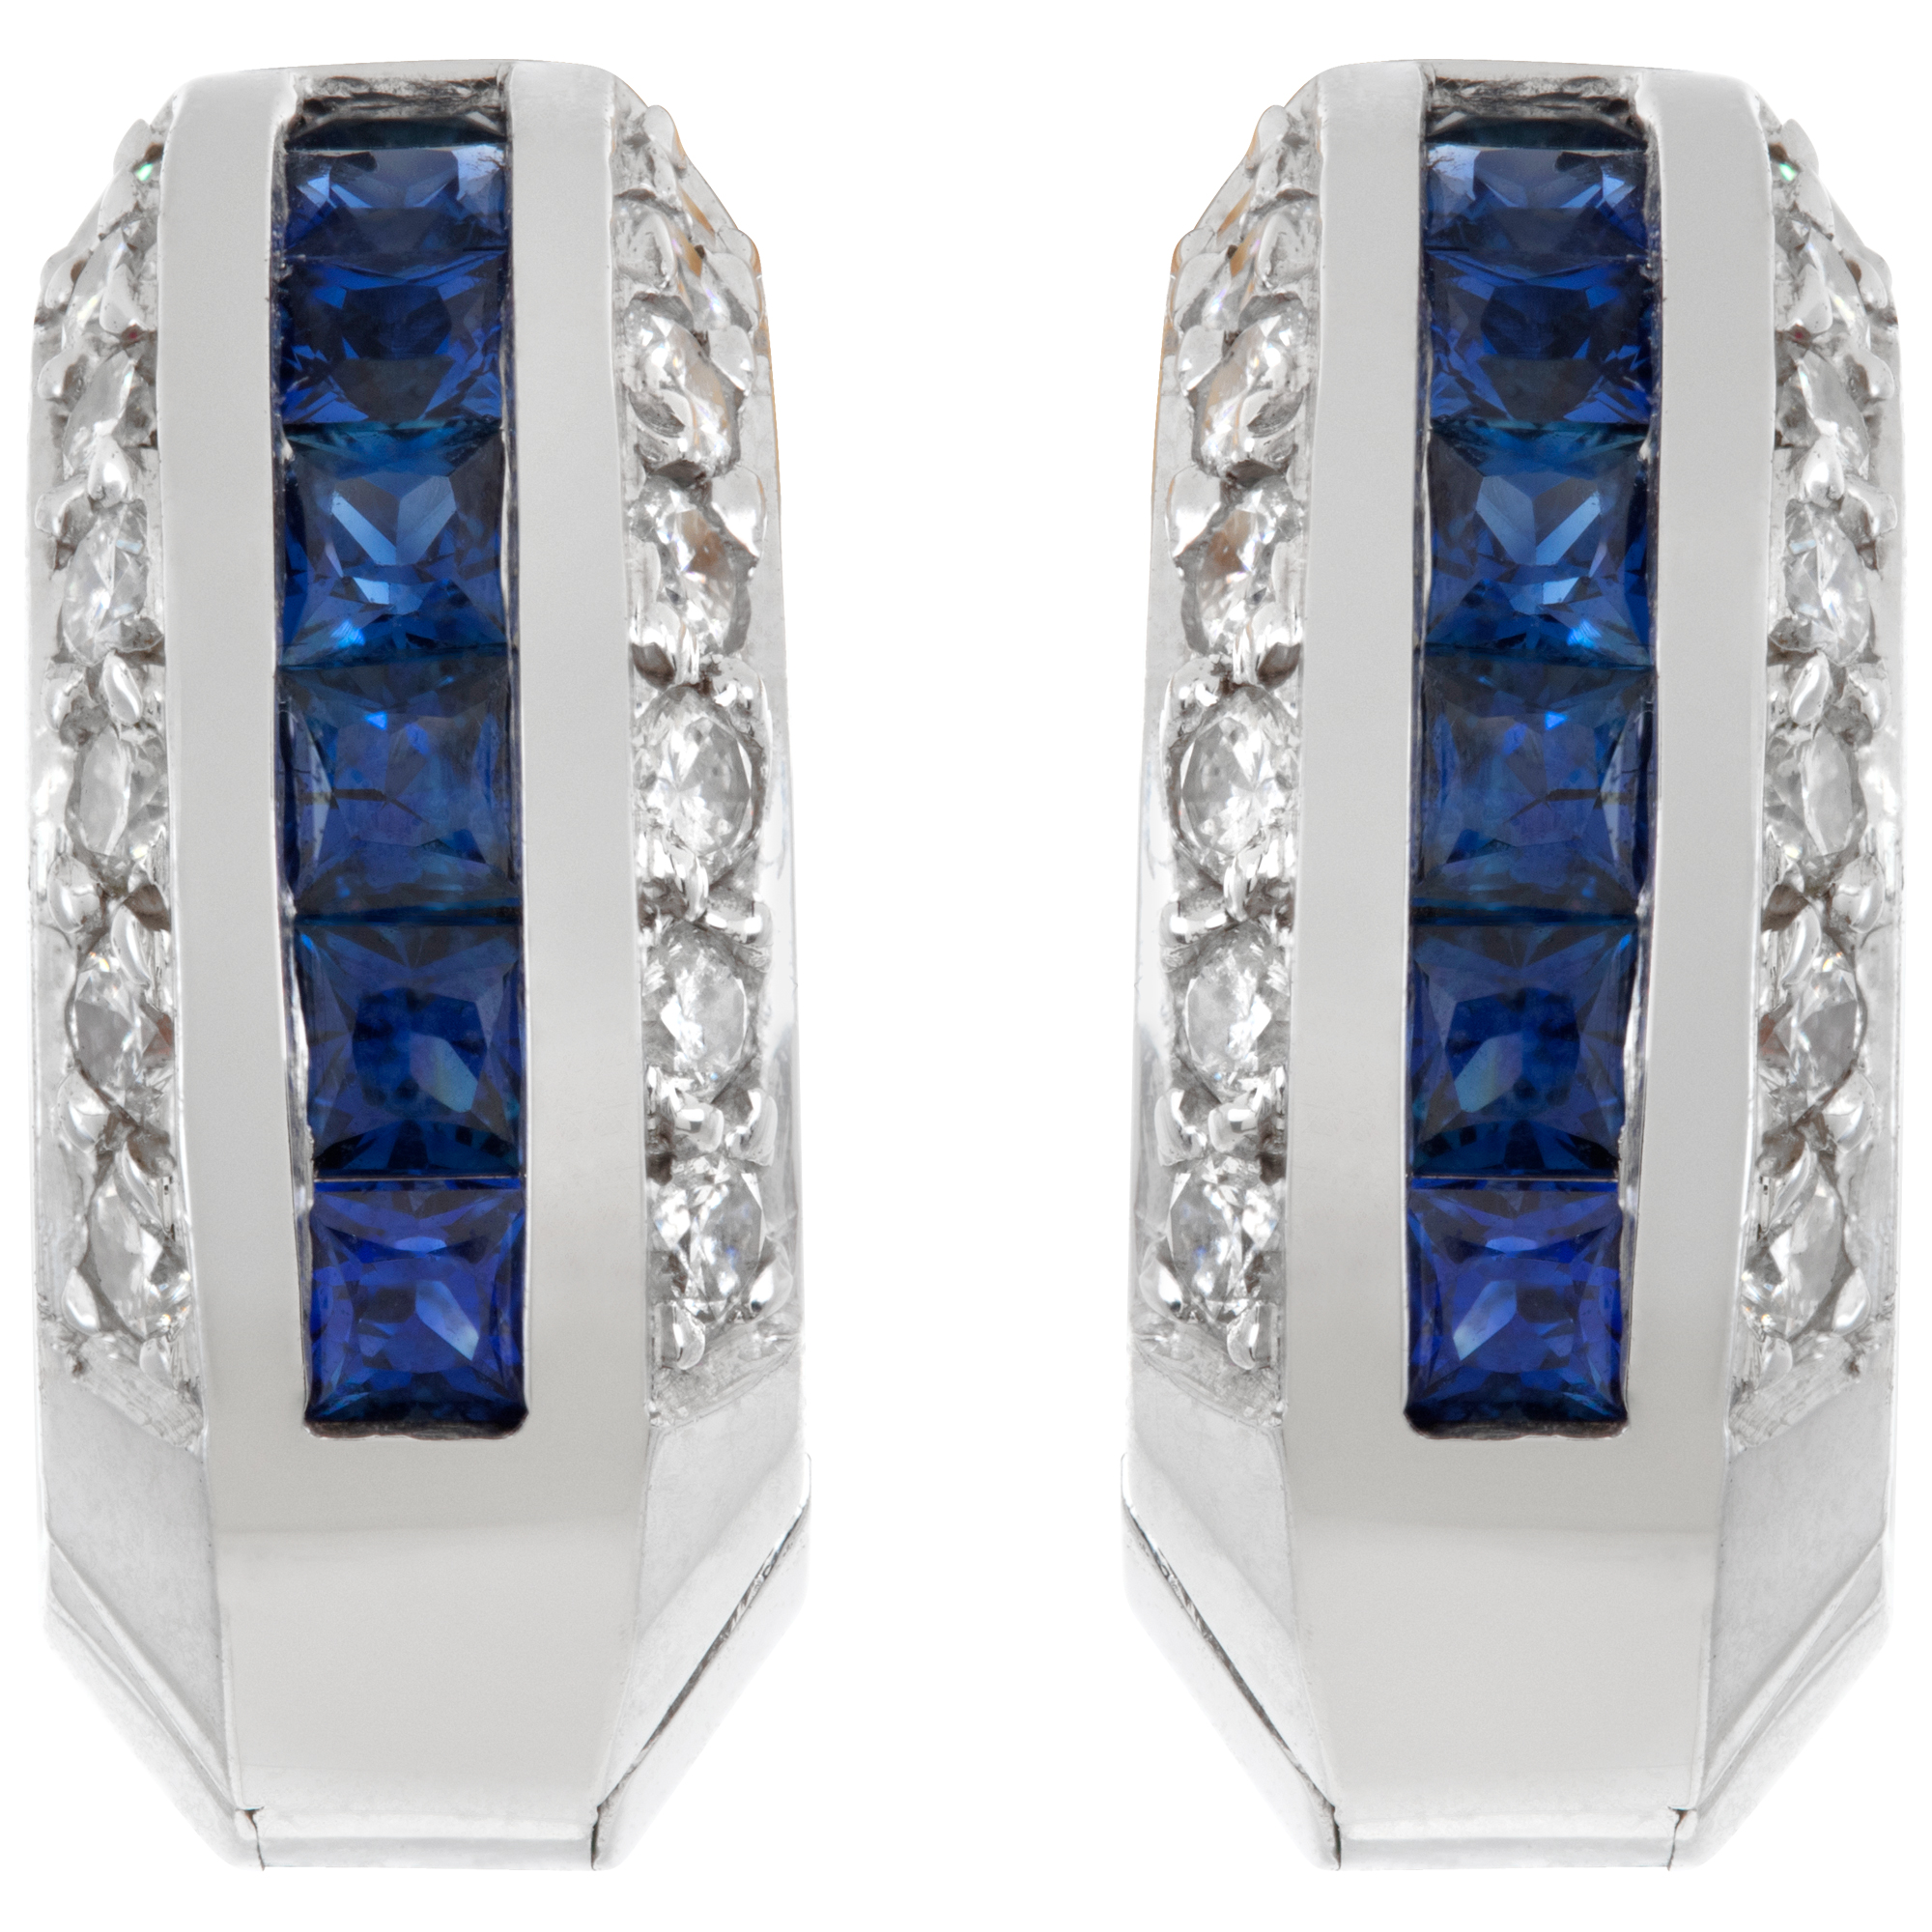 Diamond & sapphire huggie earrings in 18k white gold, approx. 0.30 cts in square cut sapphires & 0.30 carats in diamonds (Stones)